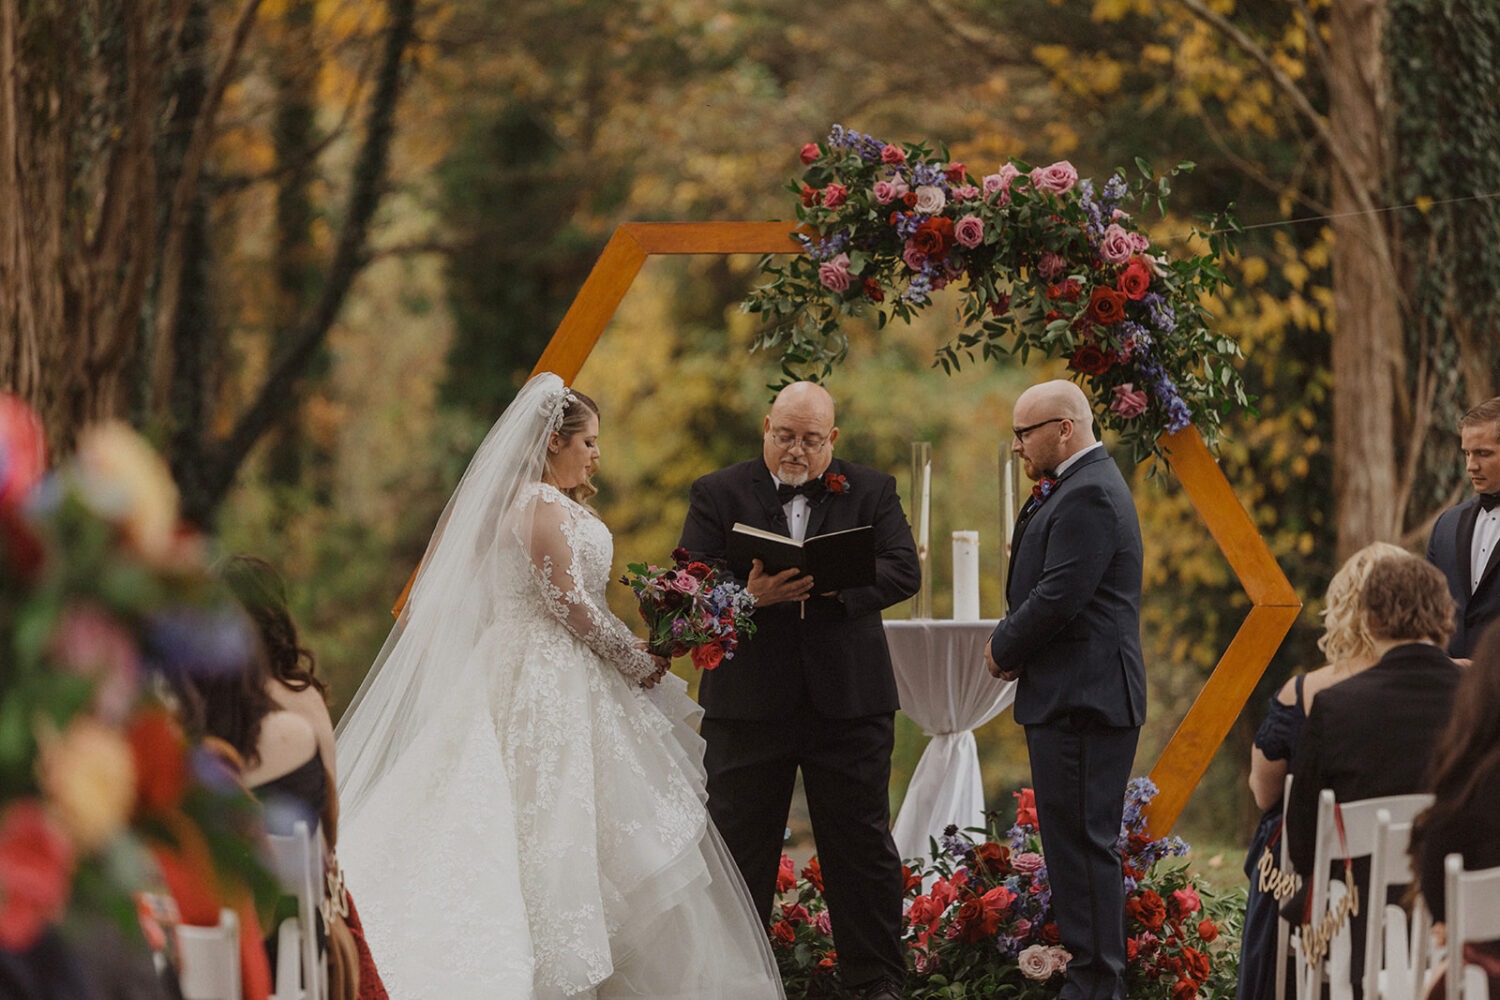 couple exchanges vows at outdoor fall Poplar Springs wedding